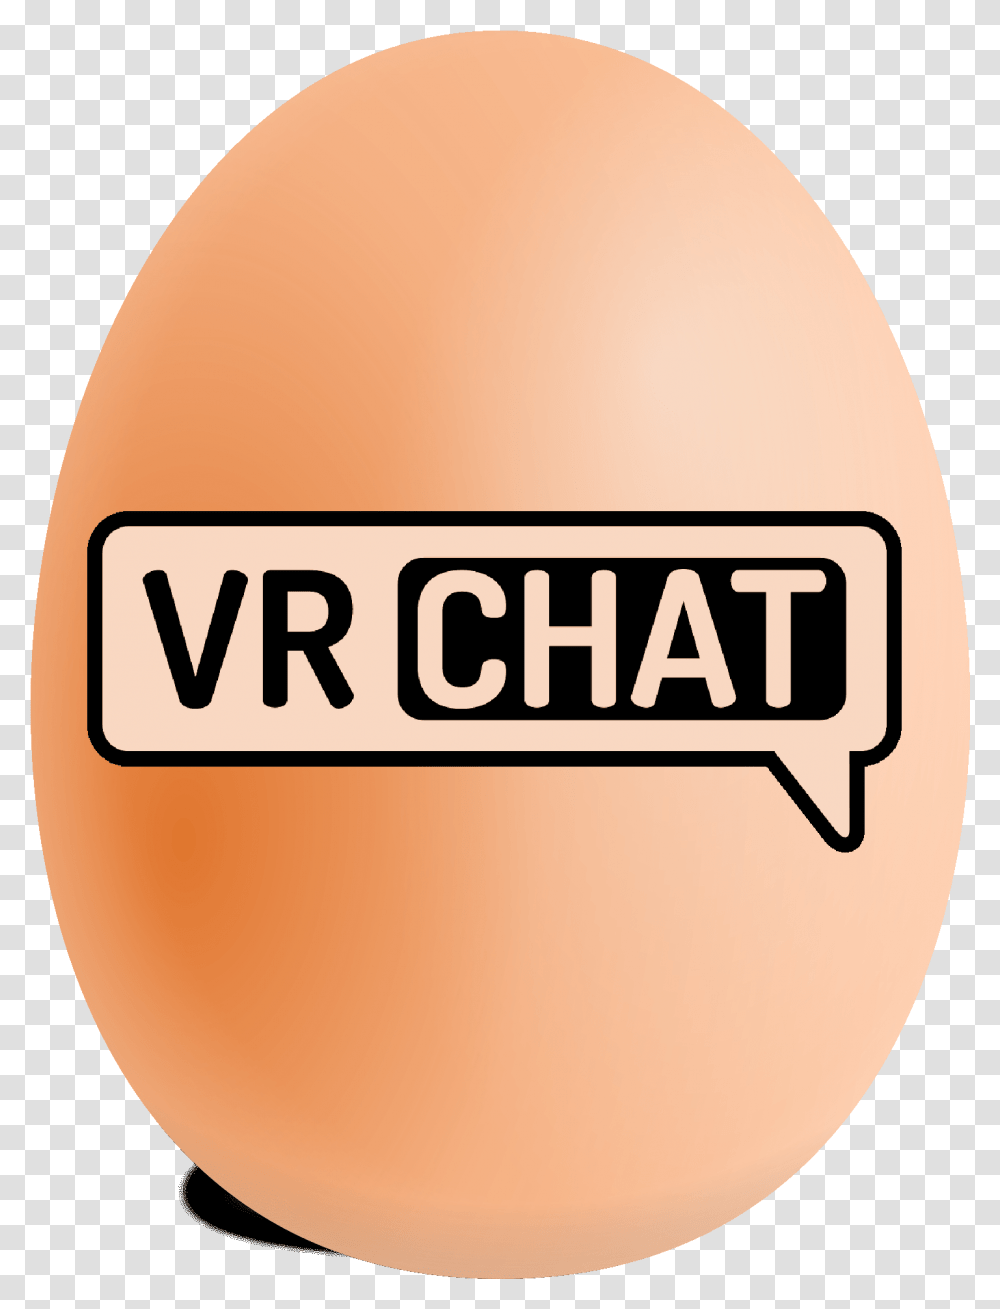 Vrchat Merchandise Just Announced Circle, Label, Text, Plant, Balloon Transparent Png